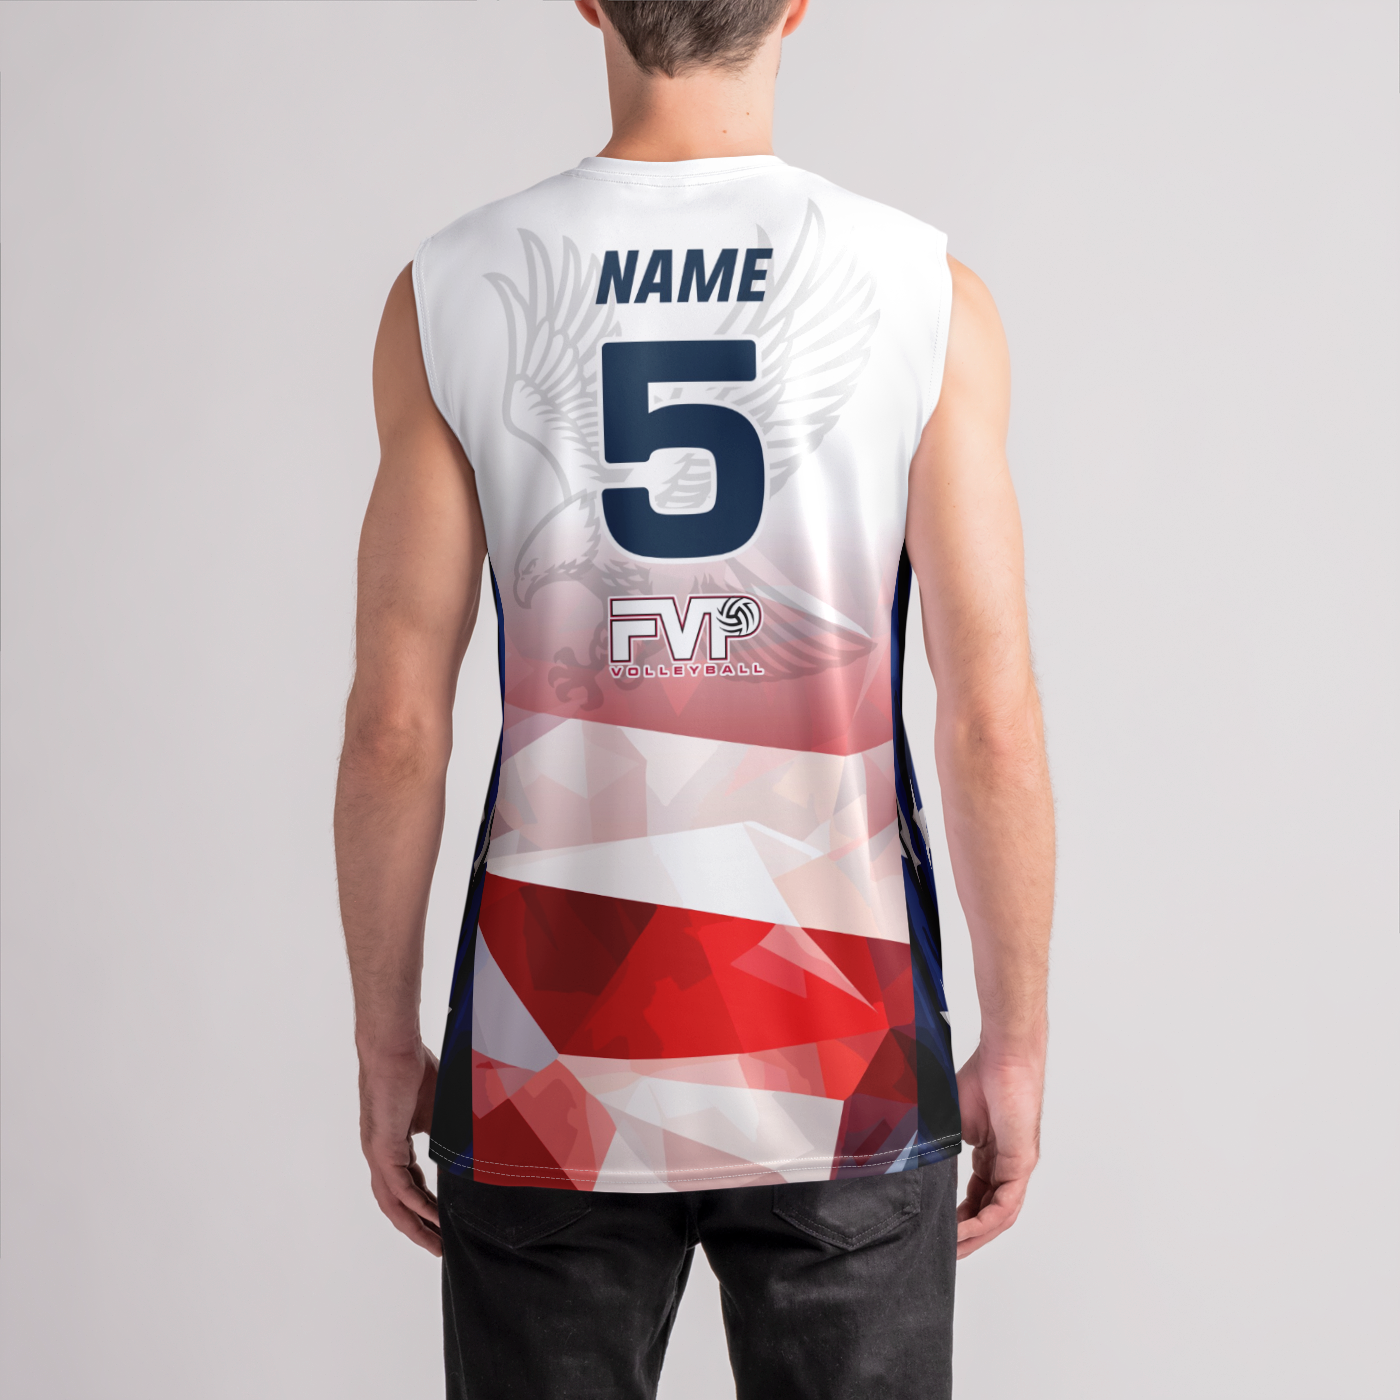 FVP 18 Justice USA Jersey